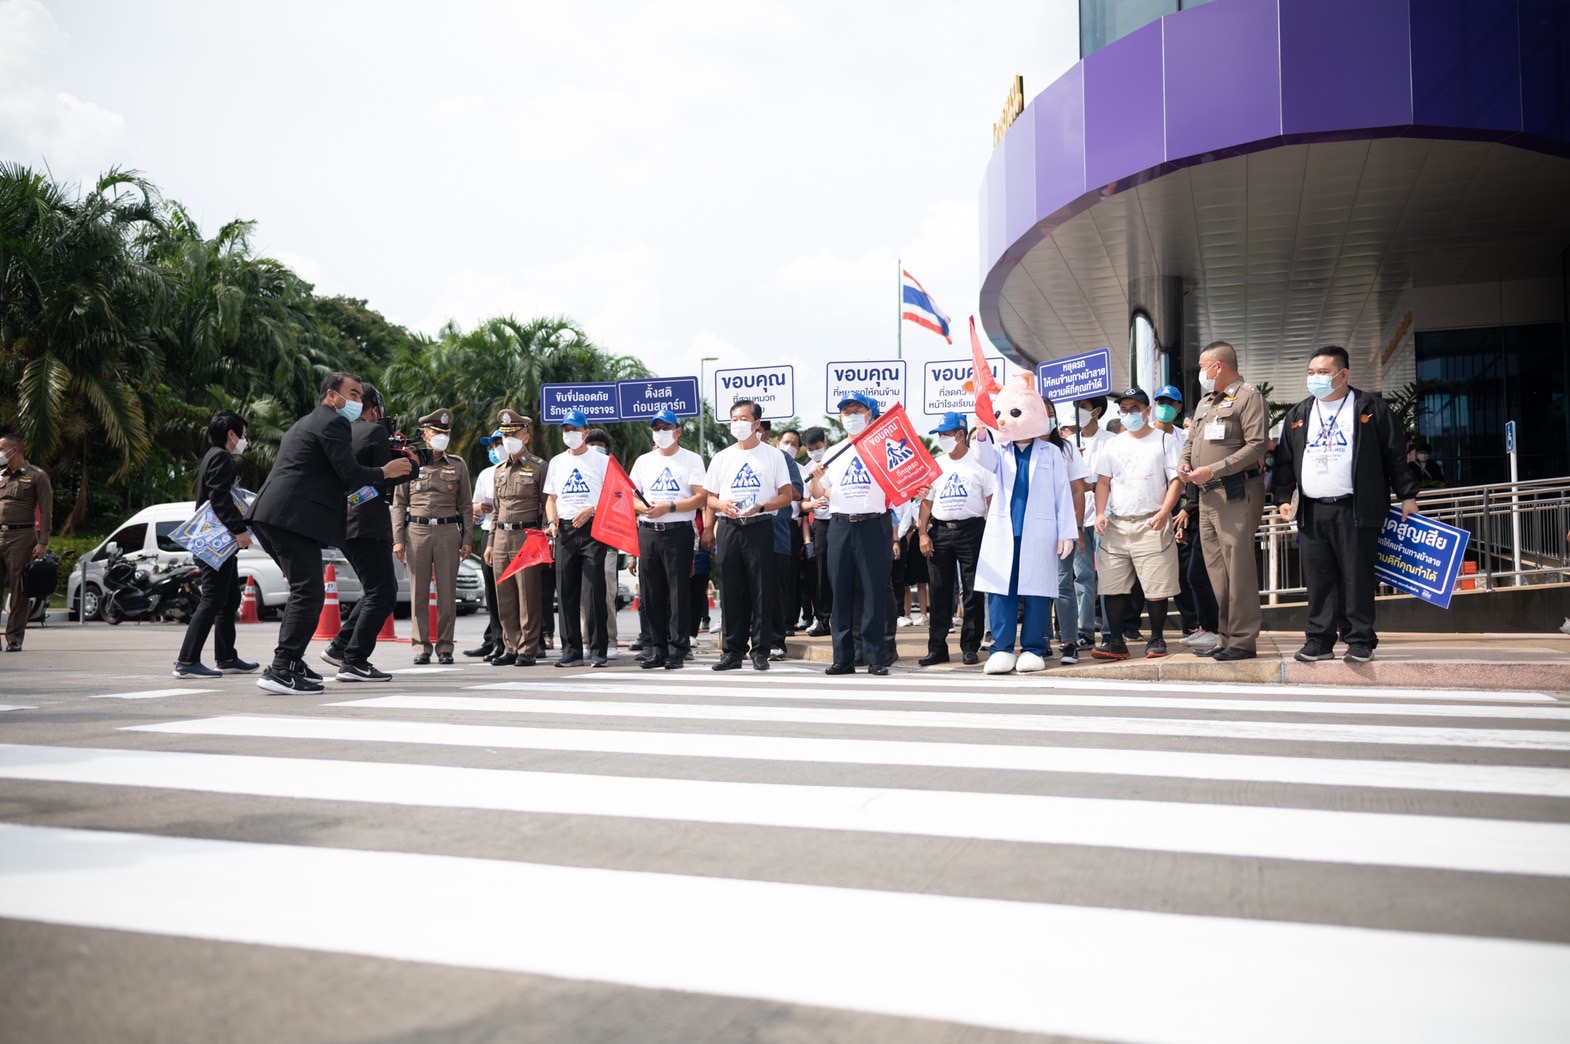 ThaiHealth and the senate promote the use of zebra crossing and road safety thaihealth